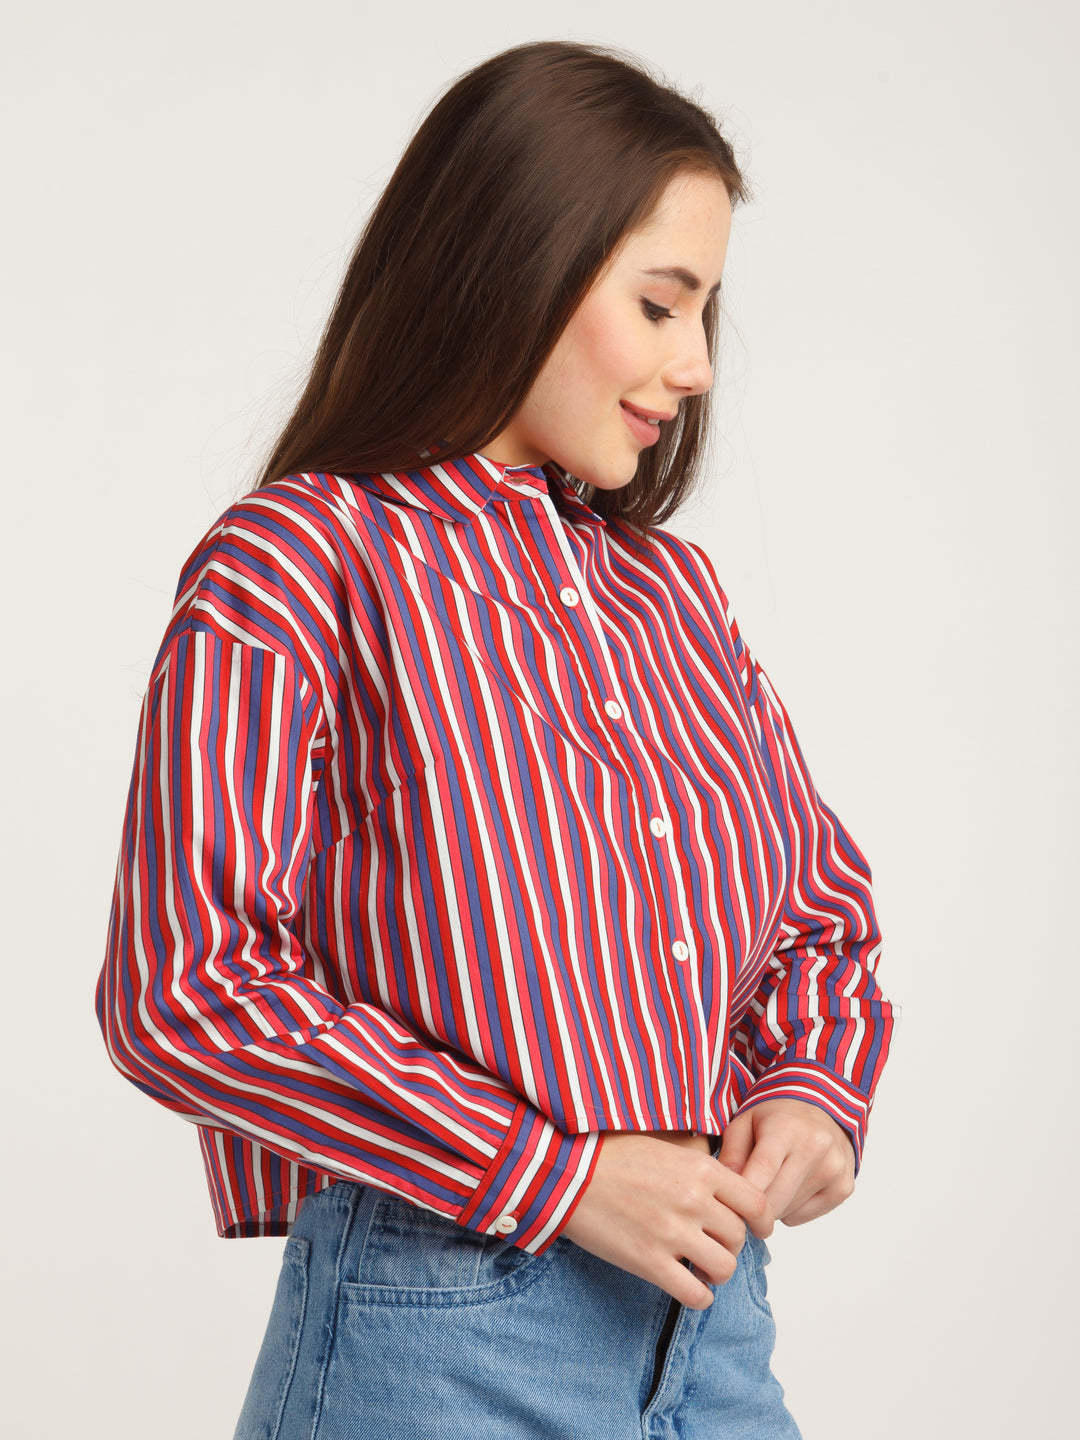 Multicolored Stripes Cropped Shirt For Women